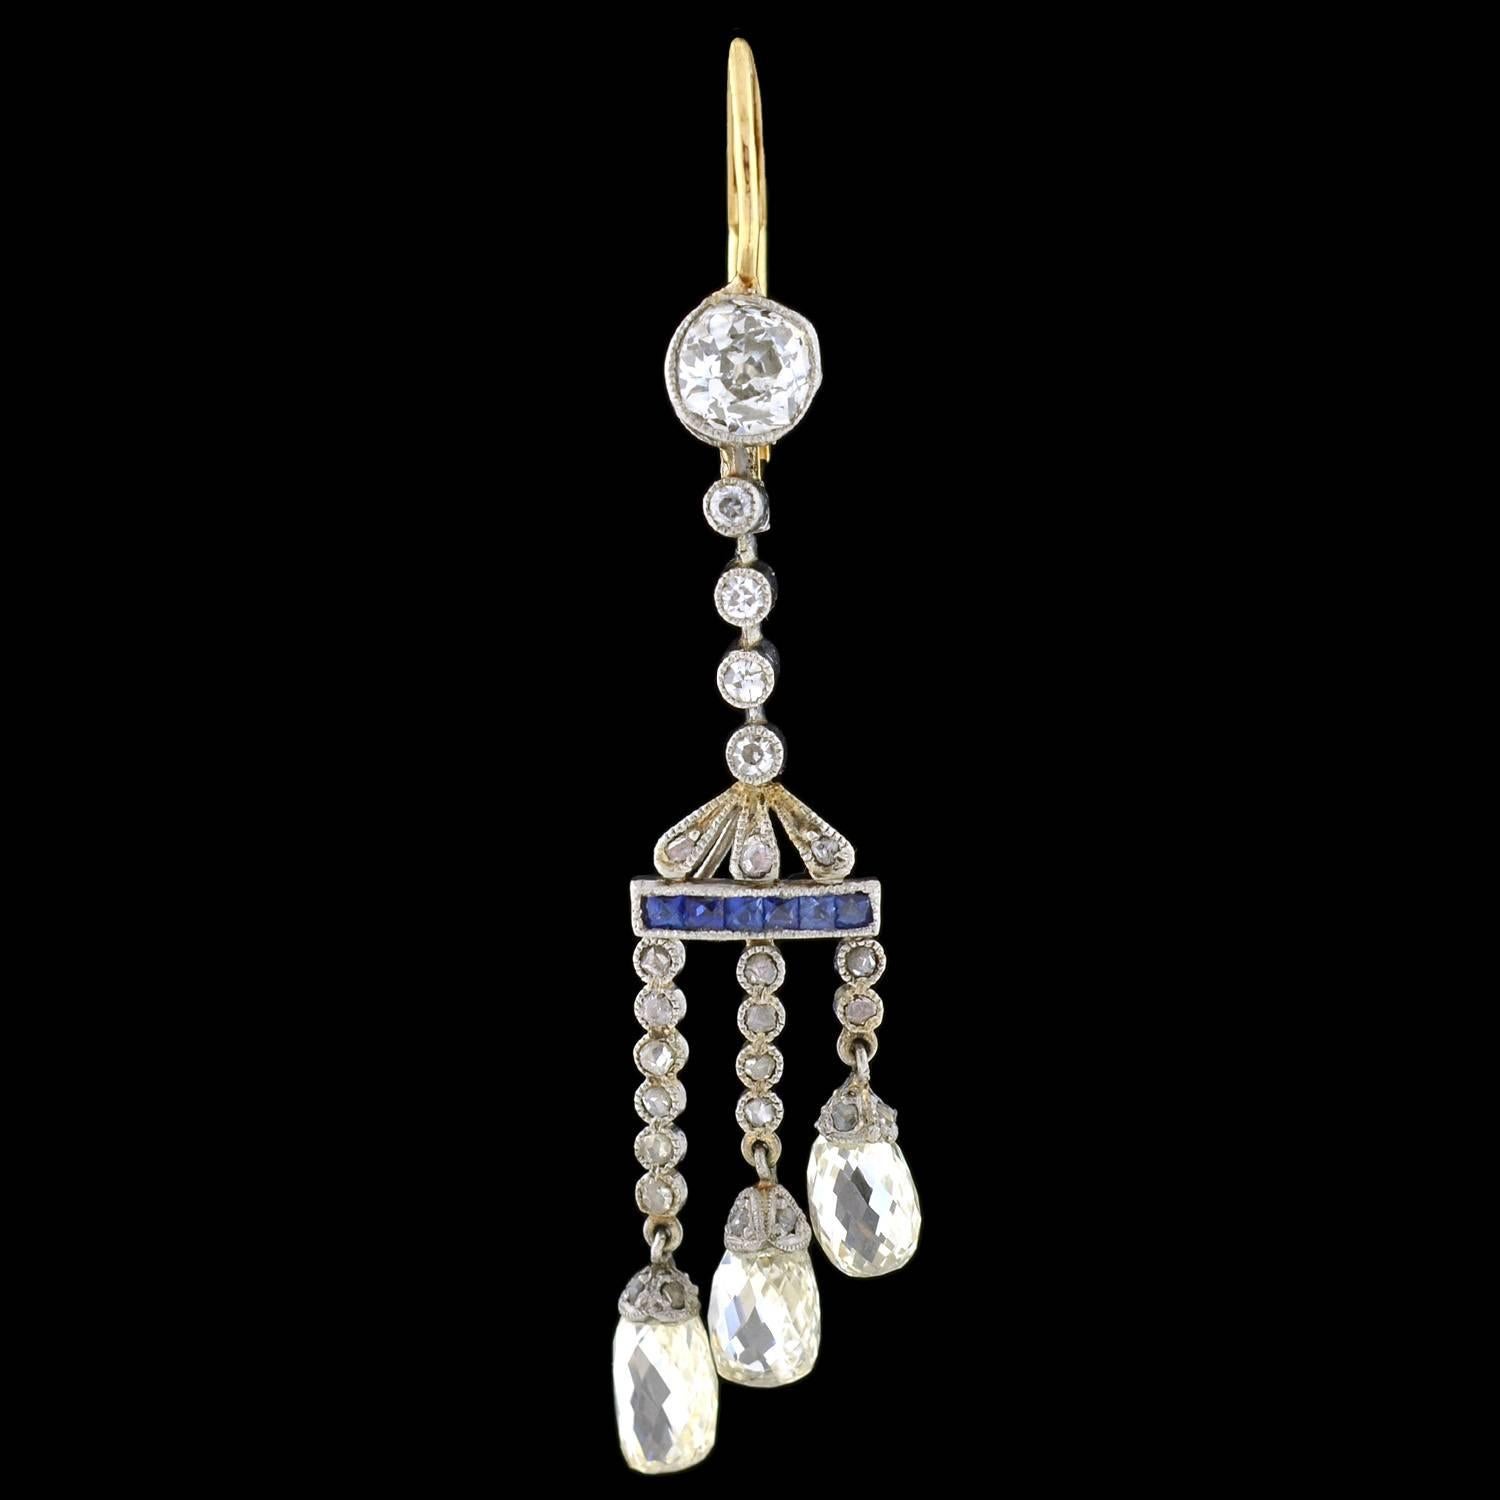 A beautiful pair of chandelier-style earrings from the Edwardian (ca1910) era! These stunning earrings are crafted in platinum, and hang from gold lever back wires (stamped 